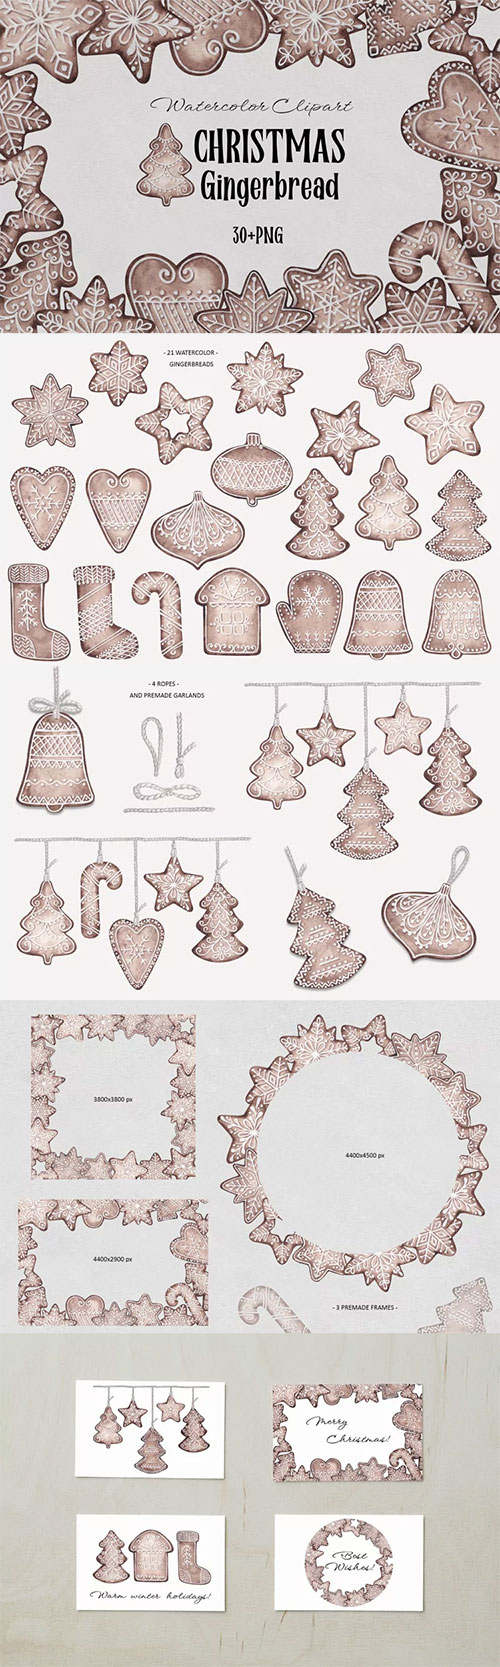 Watercolor Clipart Christmas Gingerbread 1631337